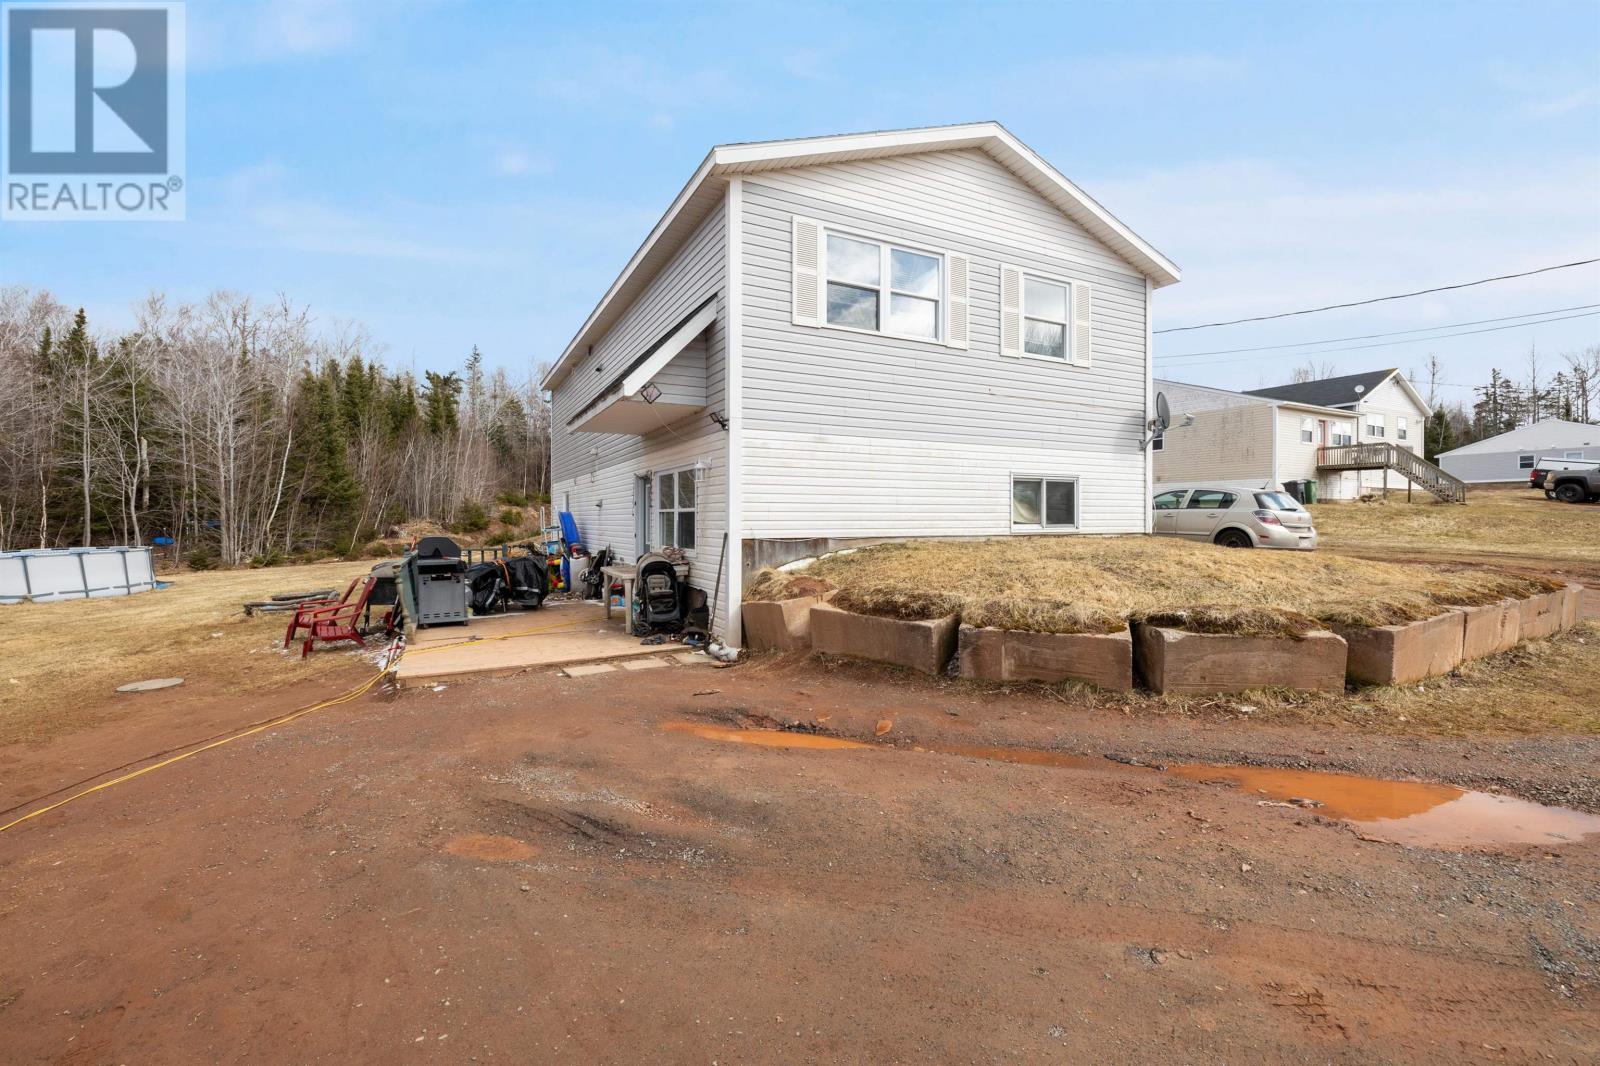 5819/5821 Campbell Road, Victoria Cross, Montague, Prince Edward Island  C0A 1R0 - Photo 12 - 202405682